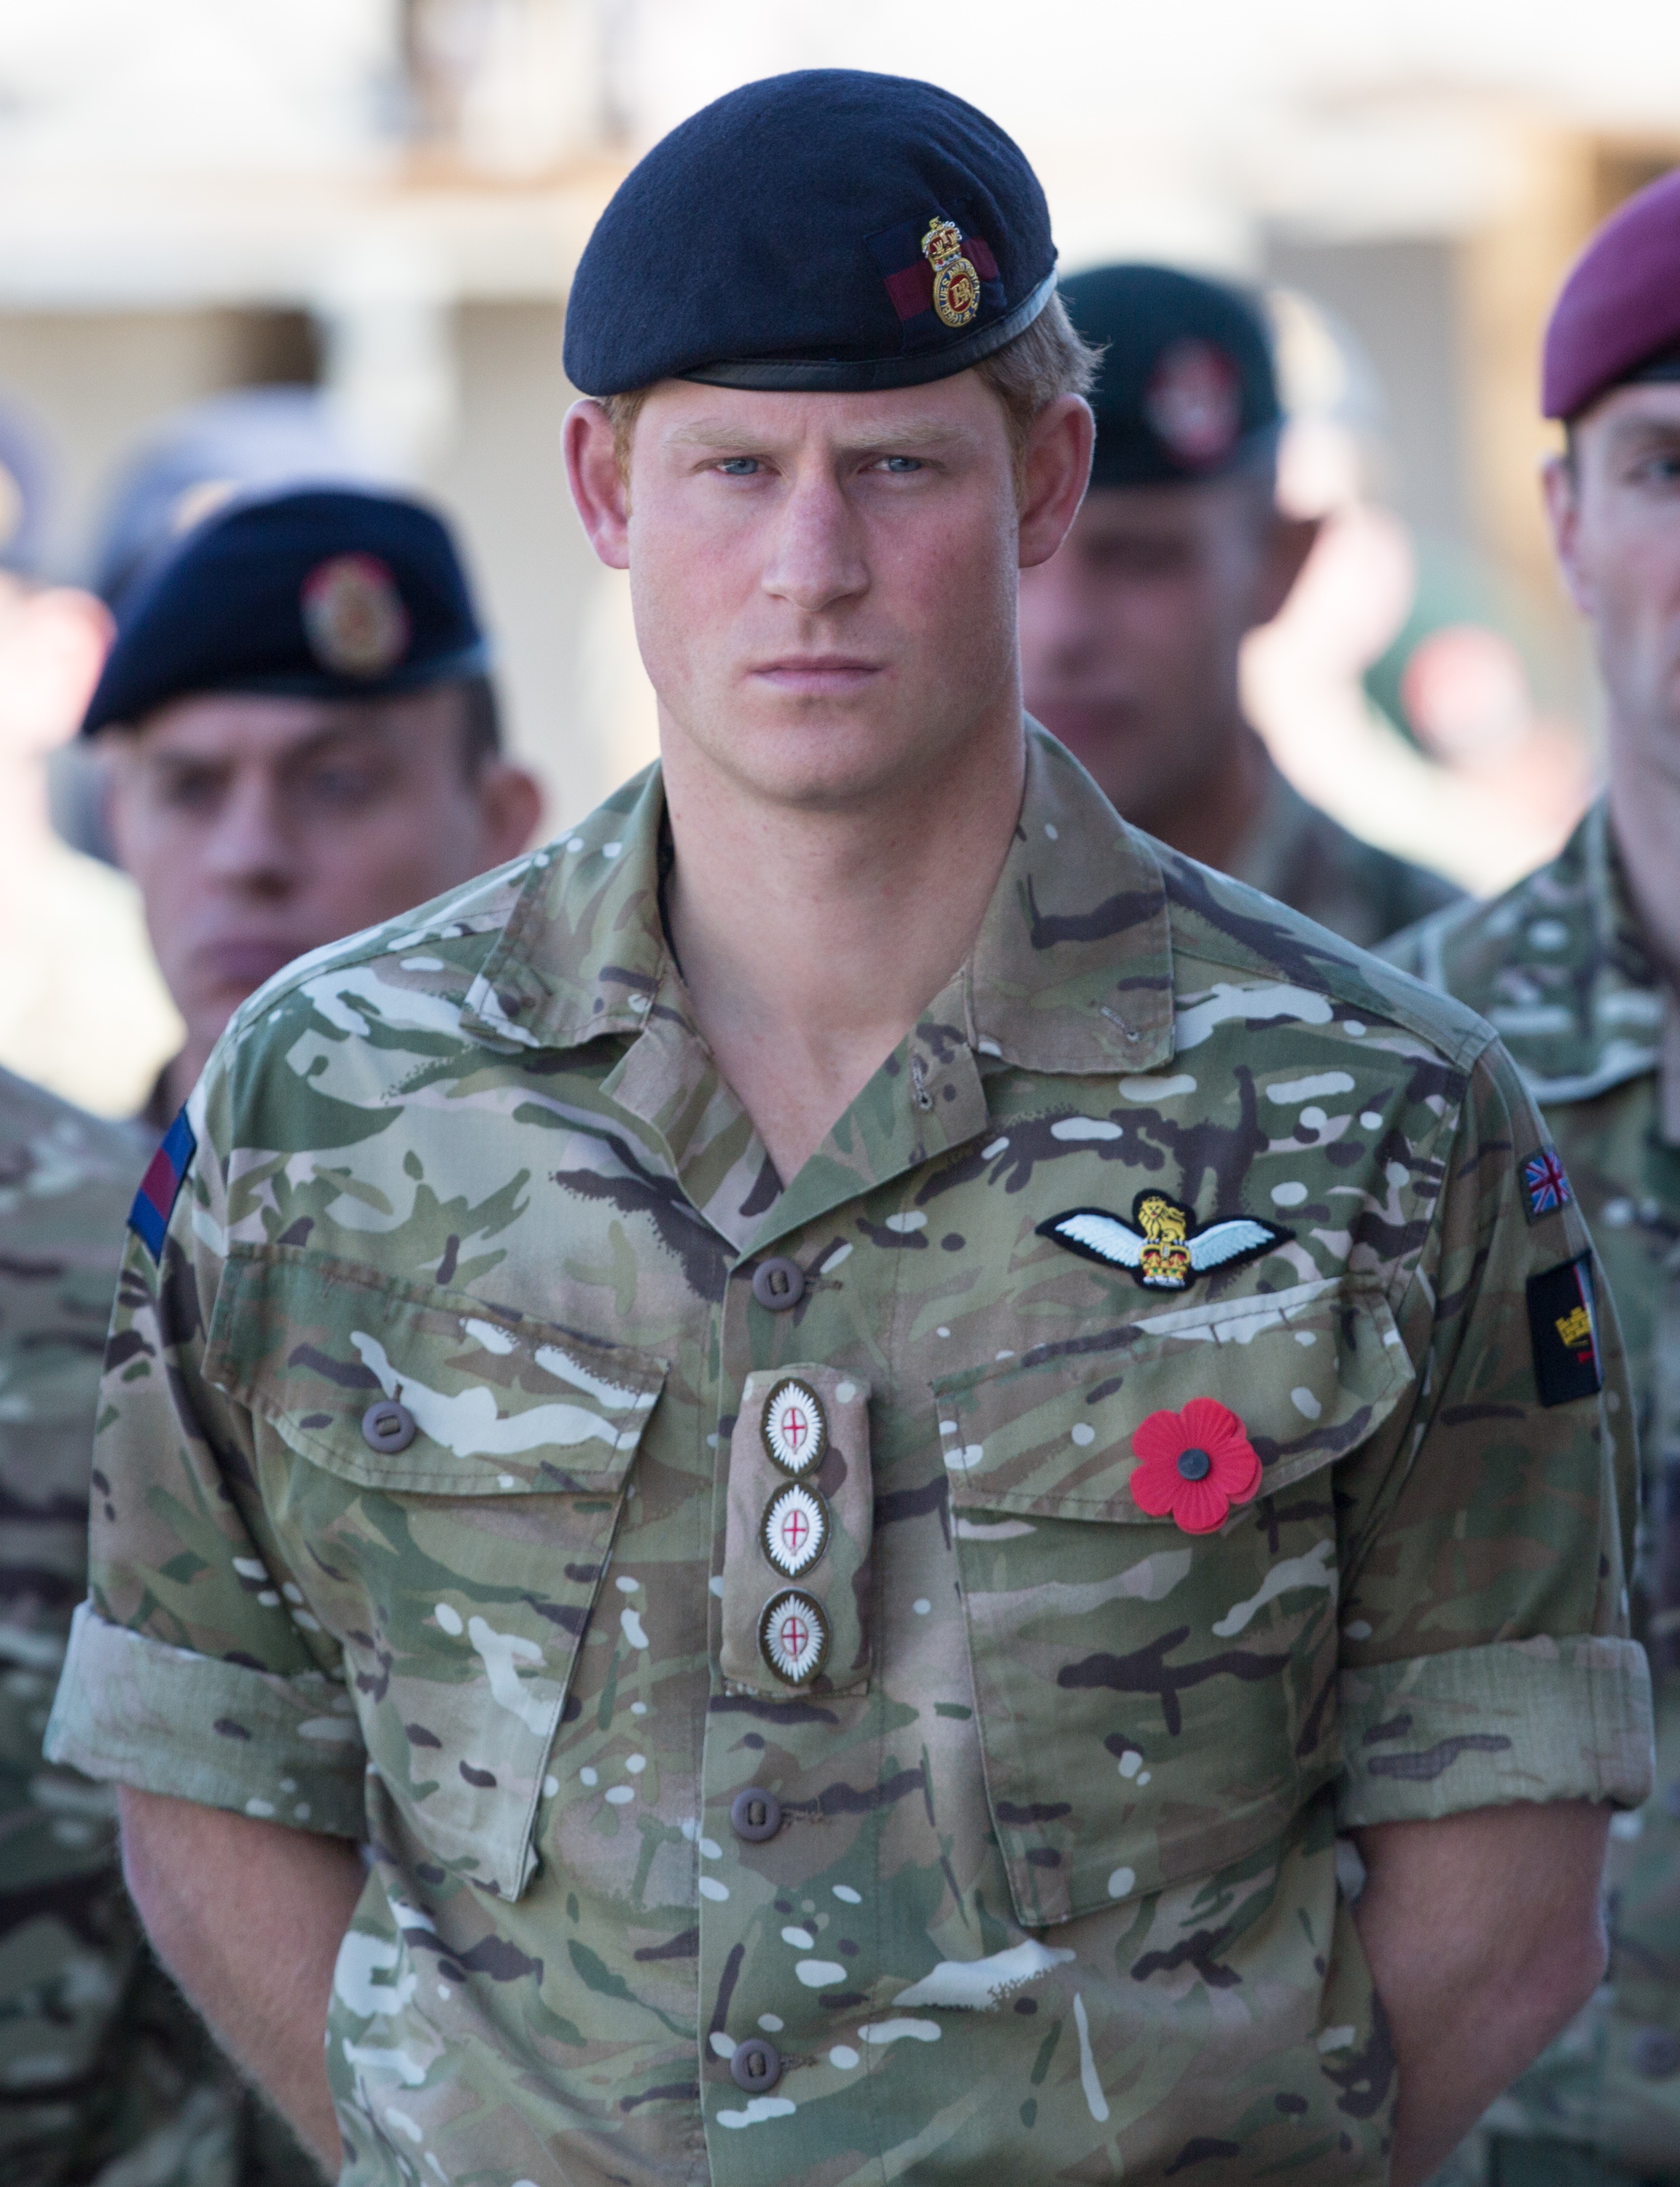 Prince Harry gathering with fellow service personnel for a Remembrance Sunday service at Kandahar Airfield in Kandahar, Afghanistan on November 9, 2014 | Source: Getty Images